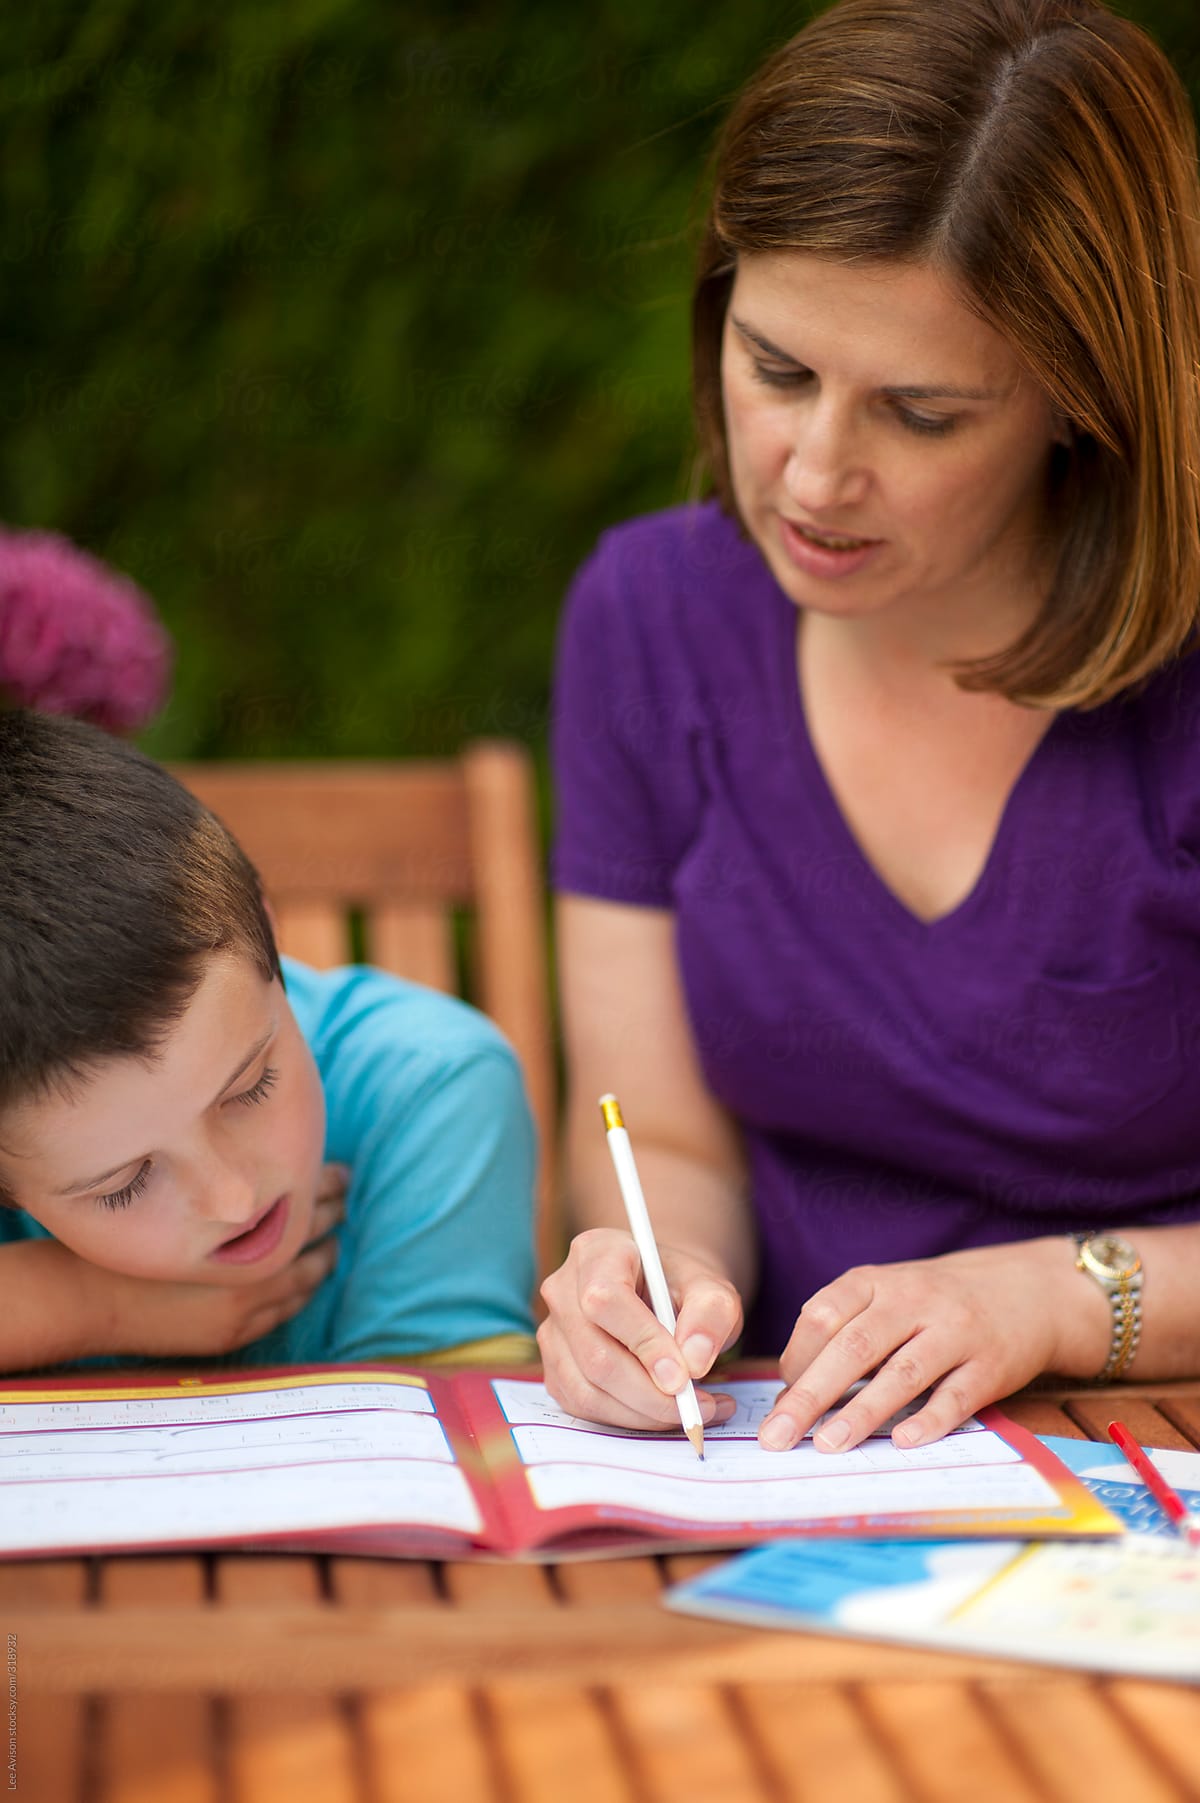 Mother Or Teacher Helping Her Son Or Pupil With School Work By